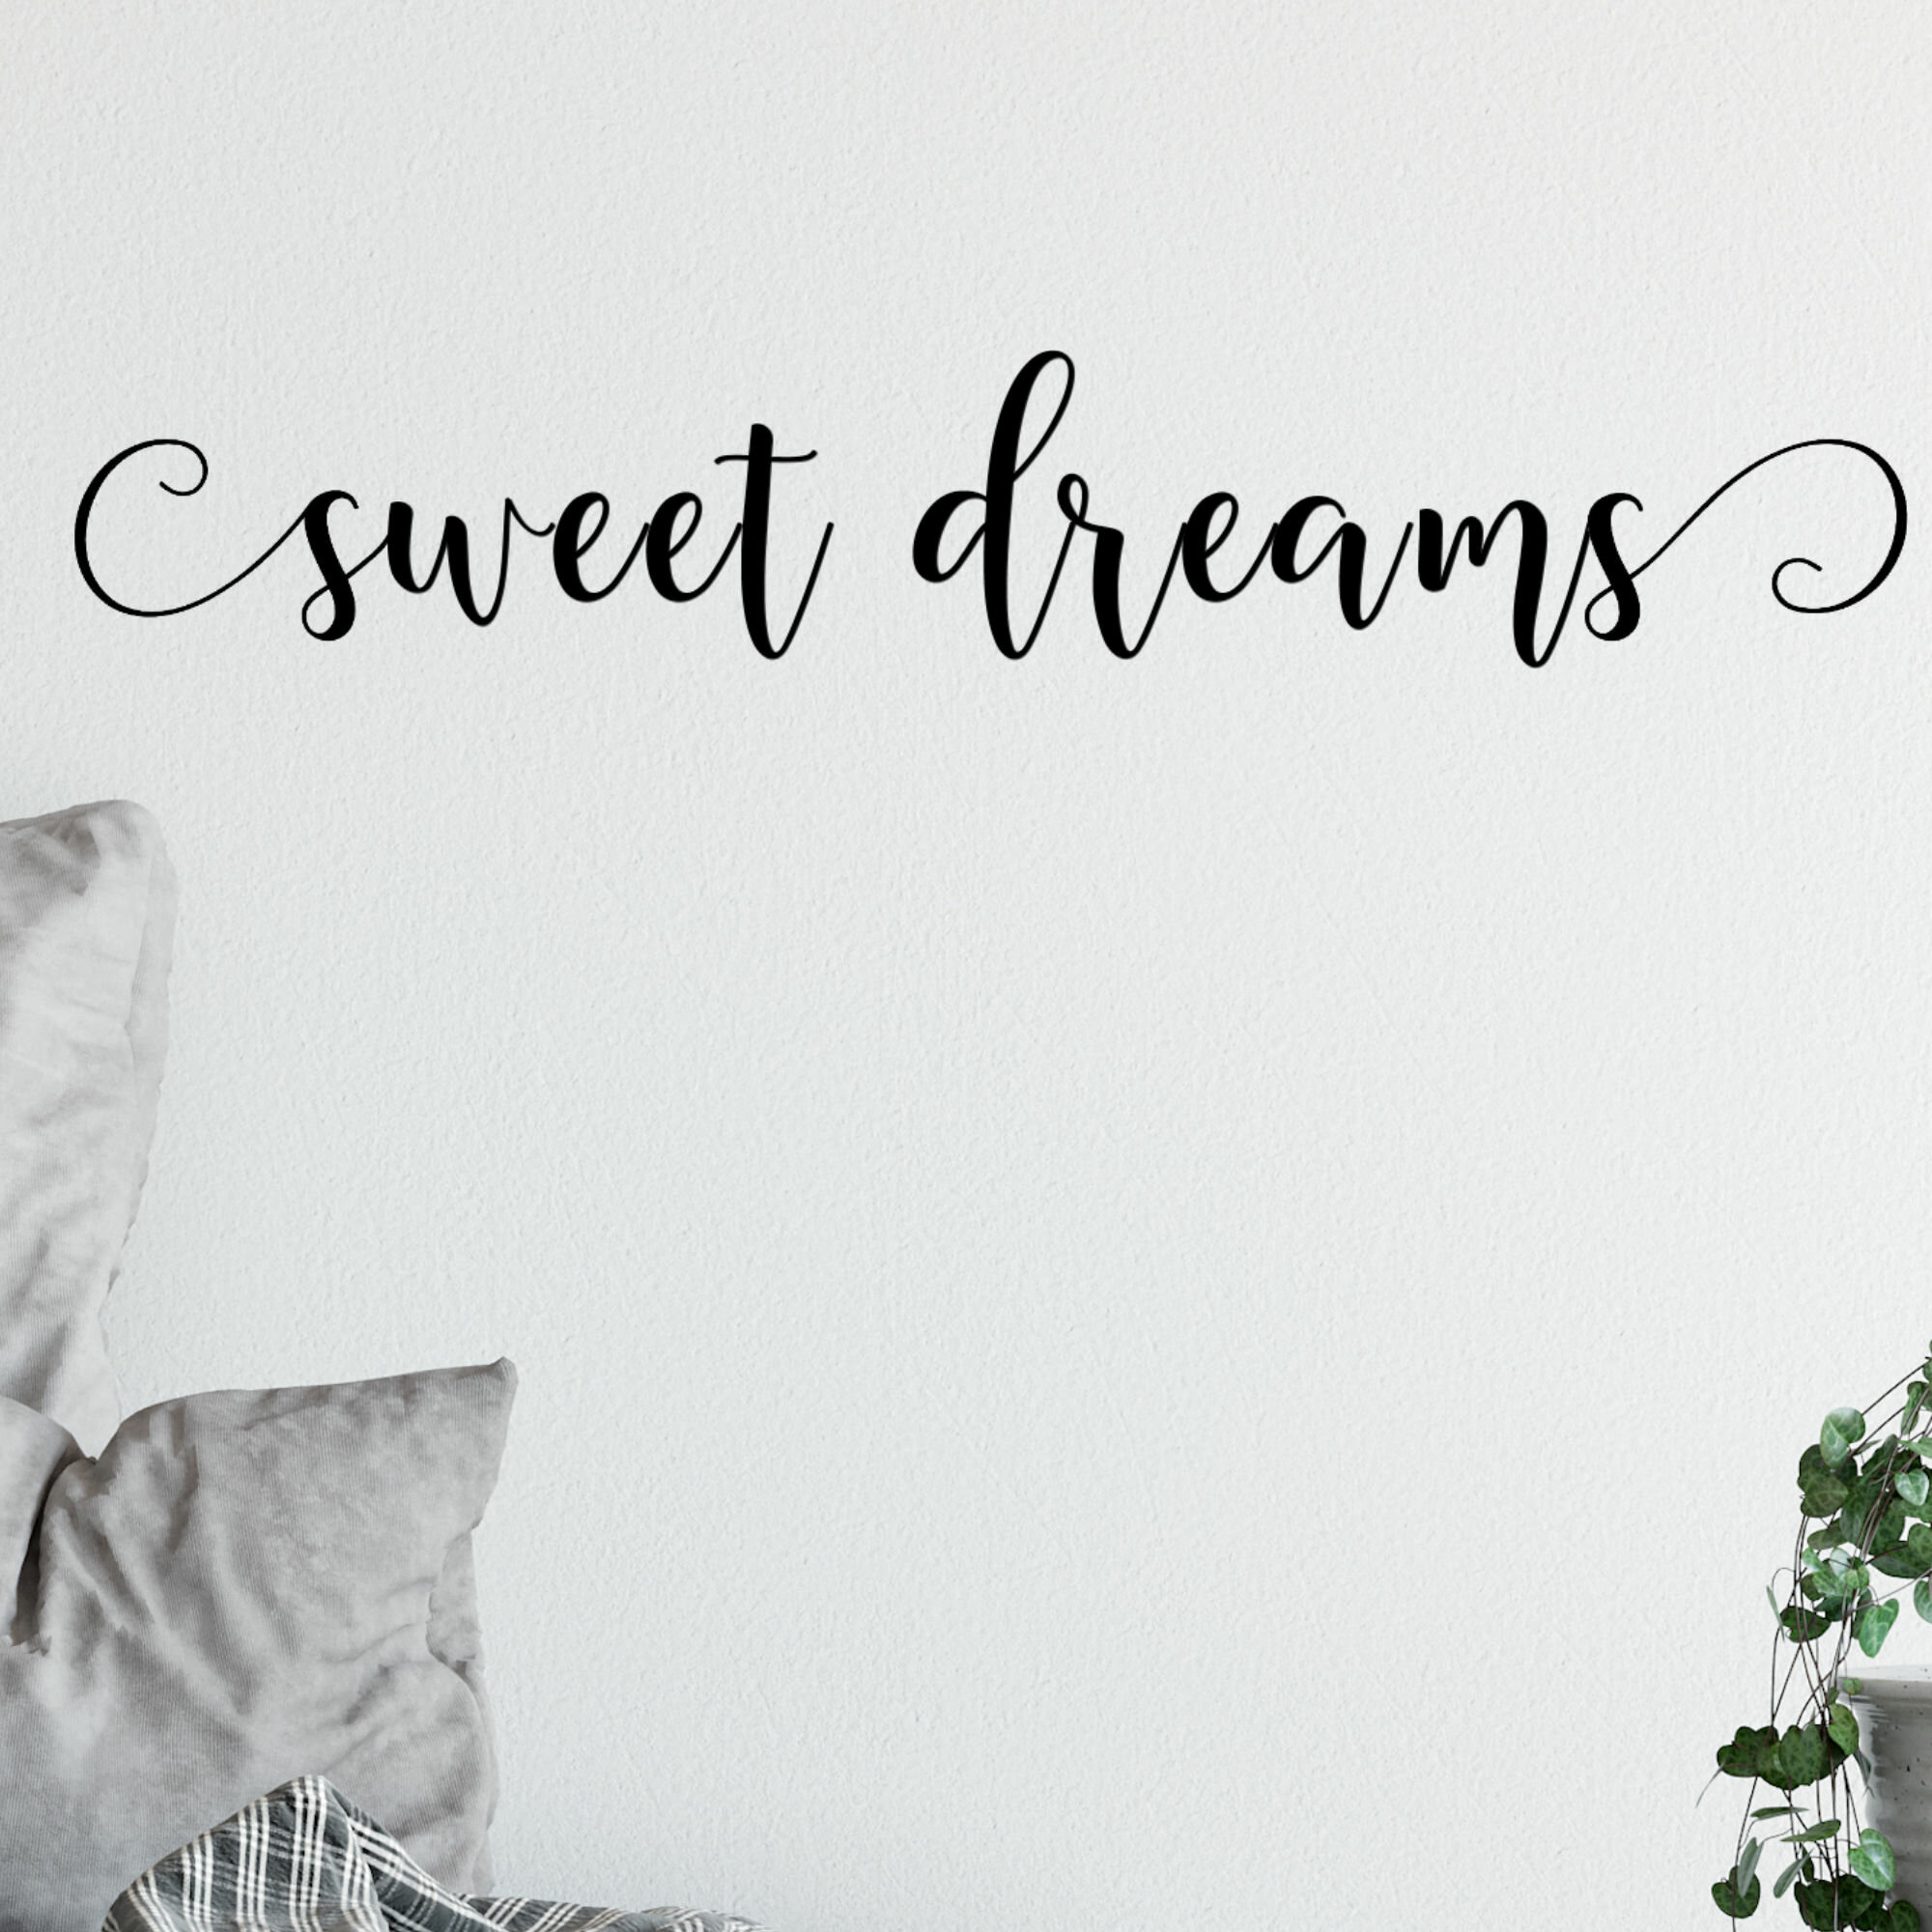 Wall stickers sweet dreams Decorations Wall Bed Room Wall Sticker ws1048 